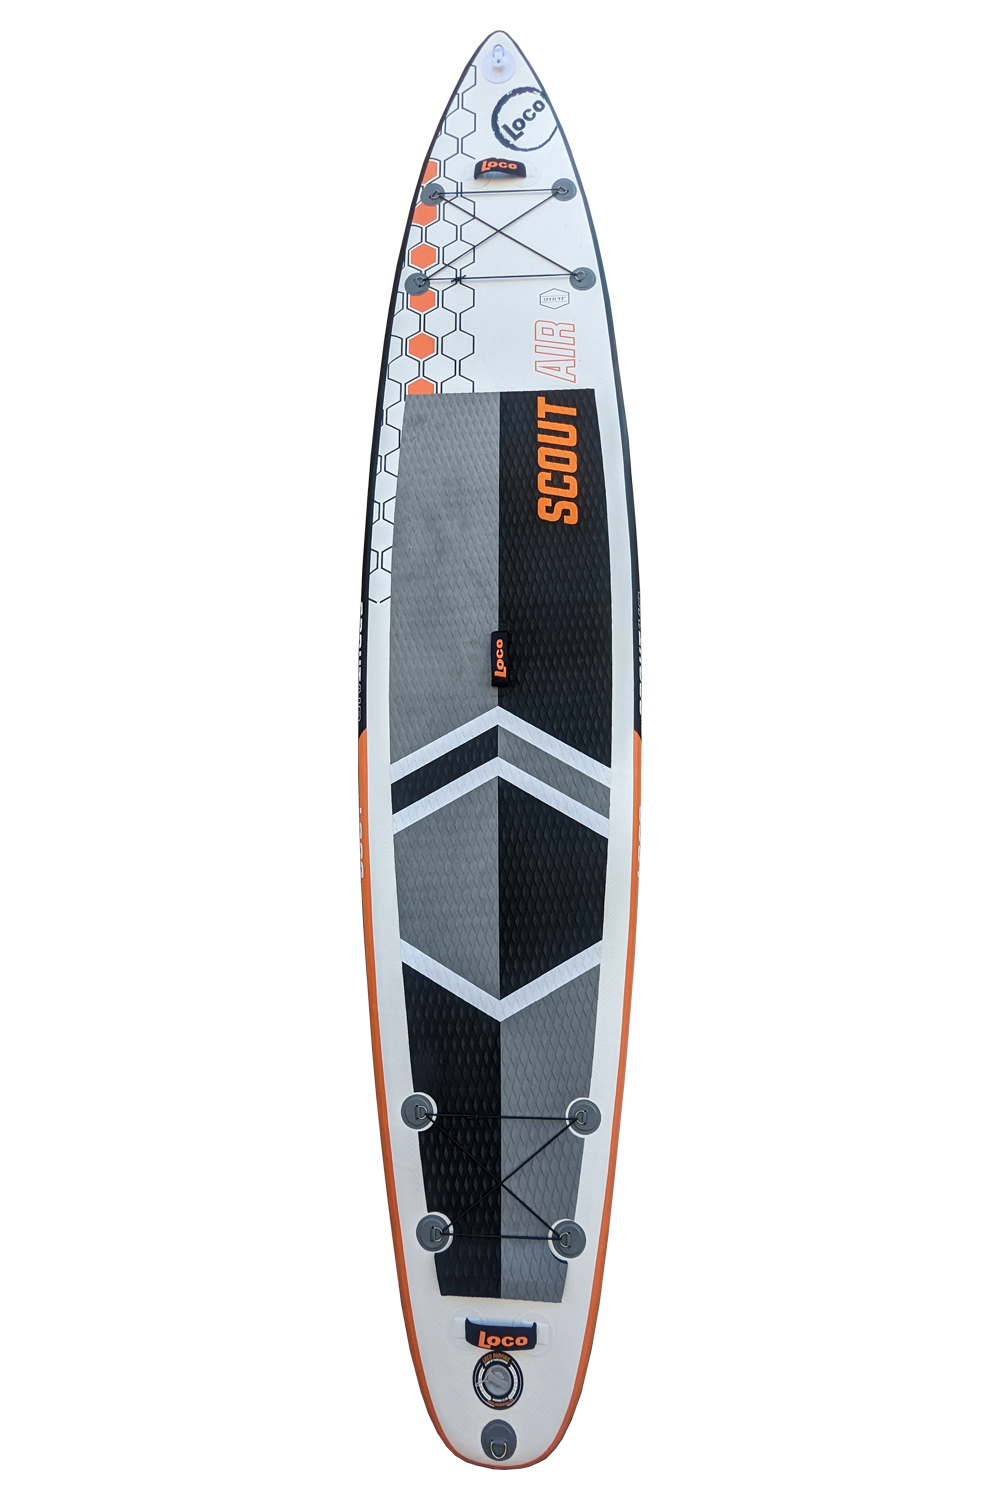 Loco Scout Air Inflatable Paddleboard, Loco Scout Air Inflatable Paddleboard 13′ x 31"